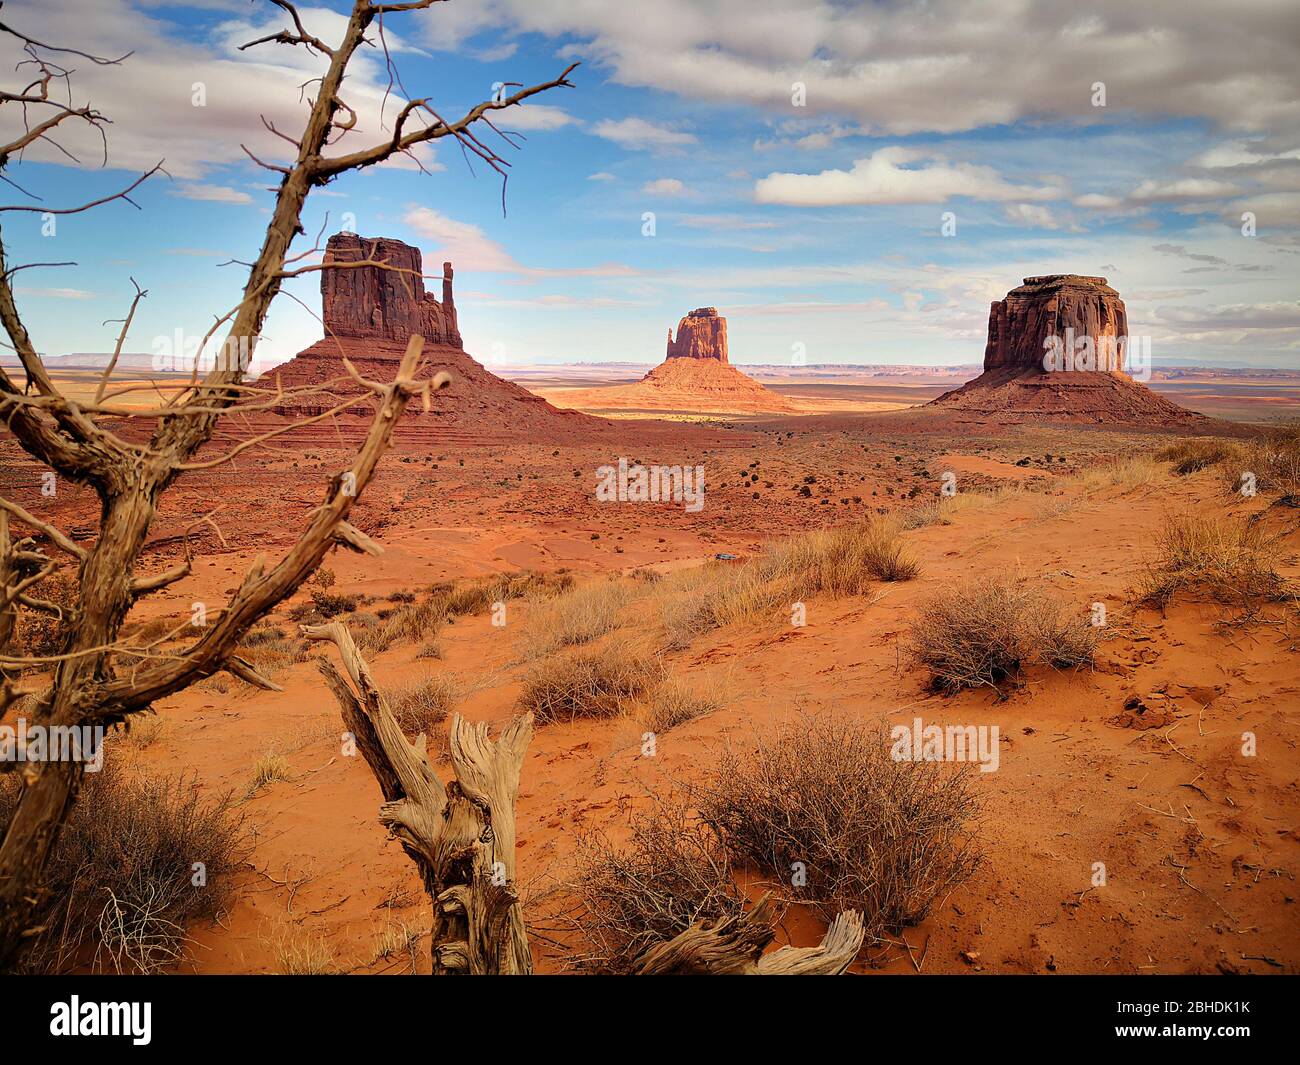 Monument Valley, view with a dead tree in the foreground over the Colorado Plateau with the popular Buttes Mitten Butte and Merrick Butte Stock Photo